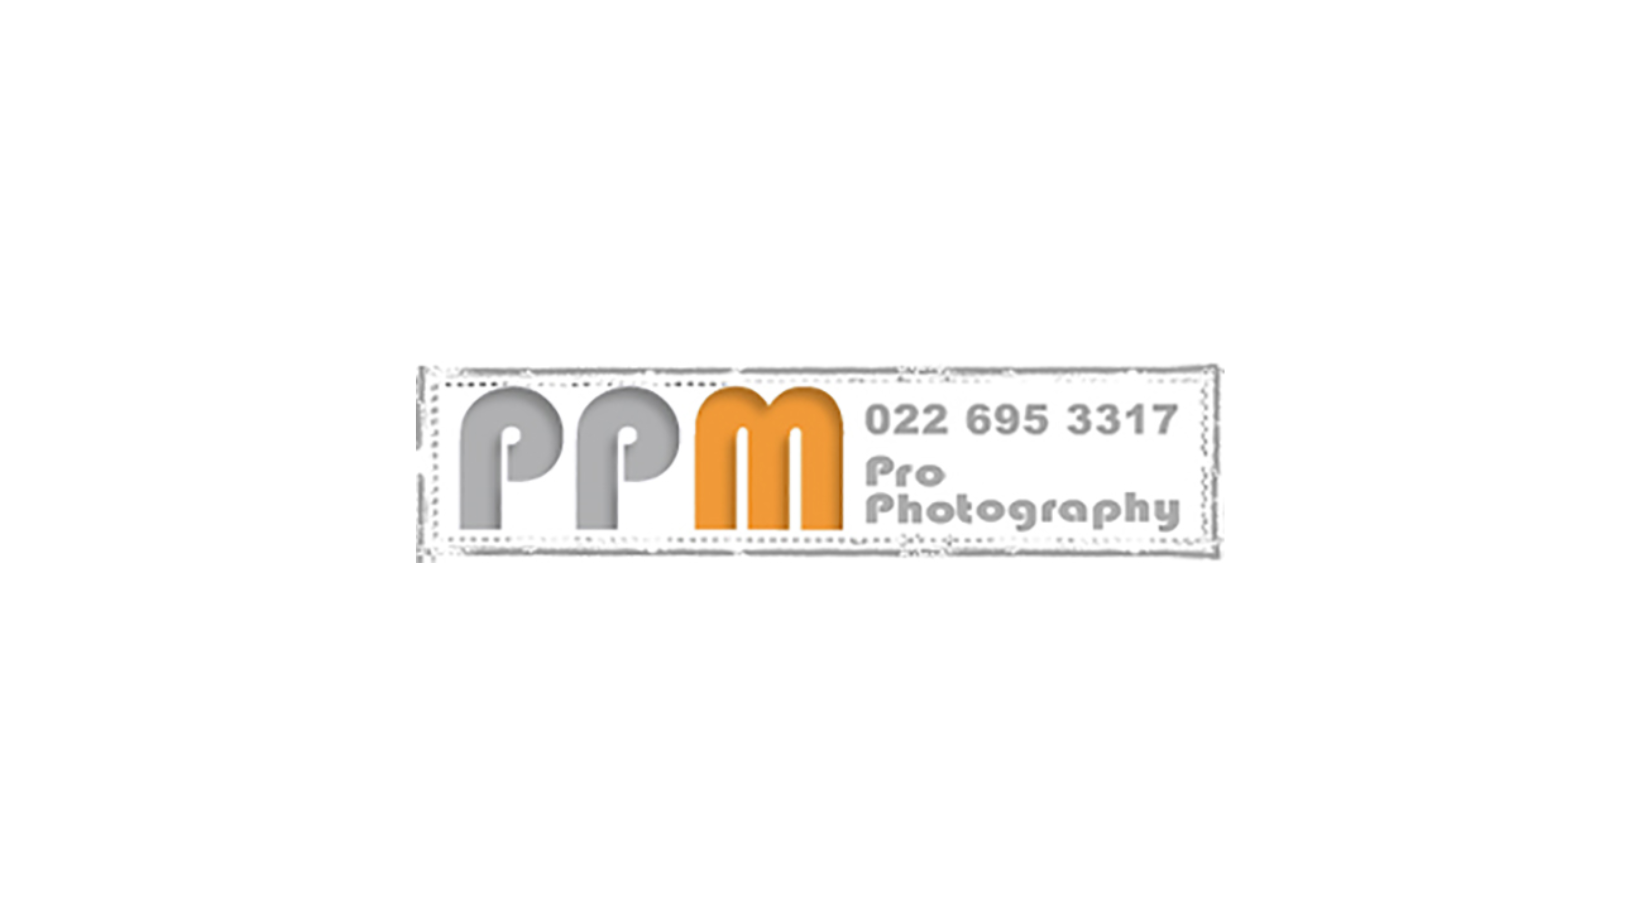 Pm brand logo Cut Out Stock Images & Pictures - Alamy